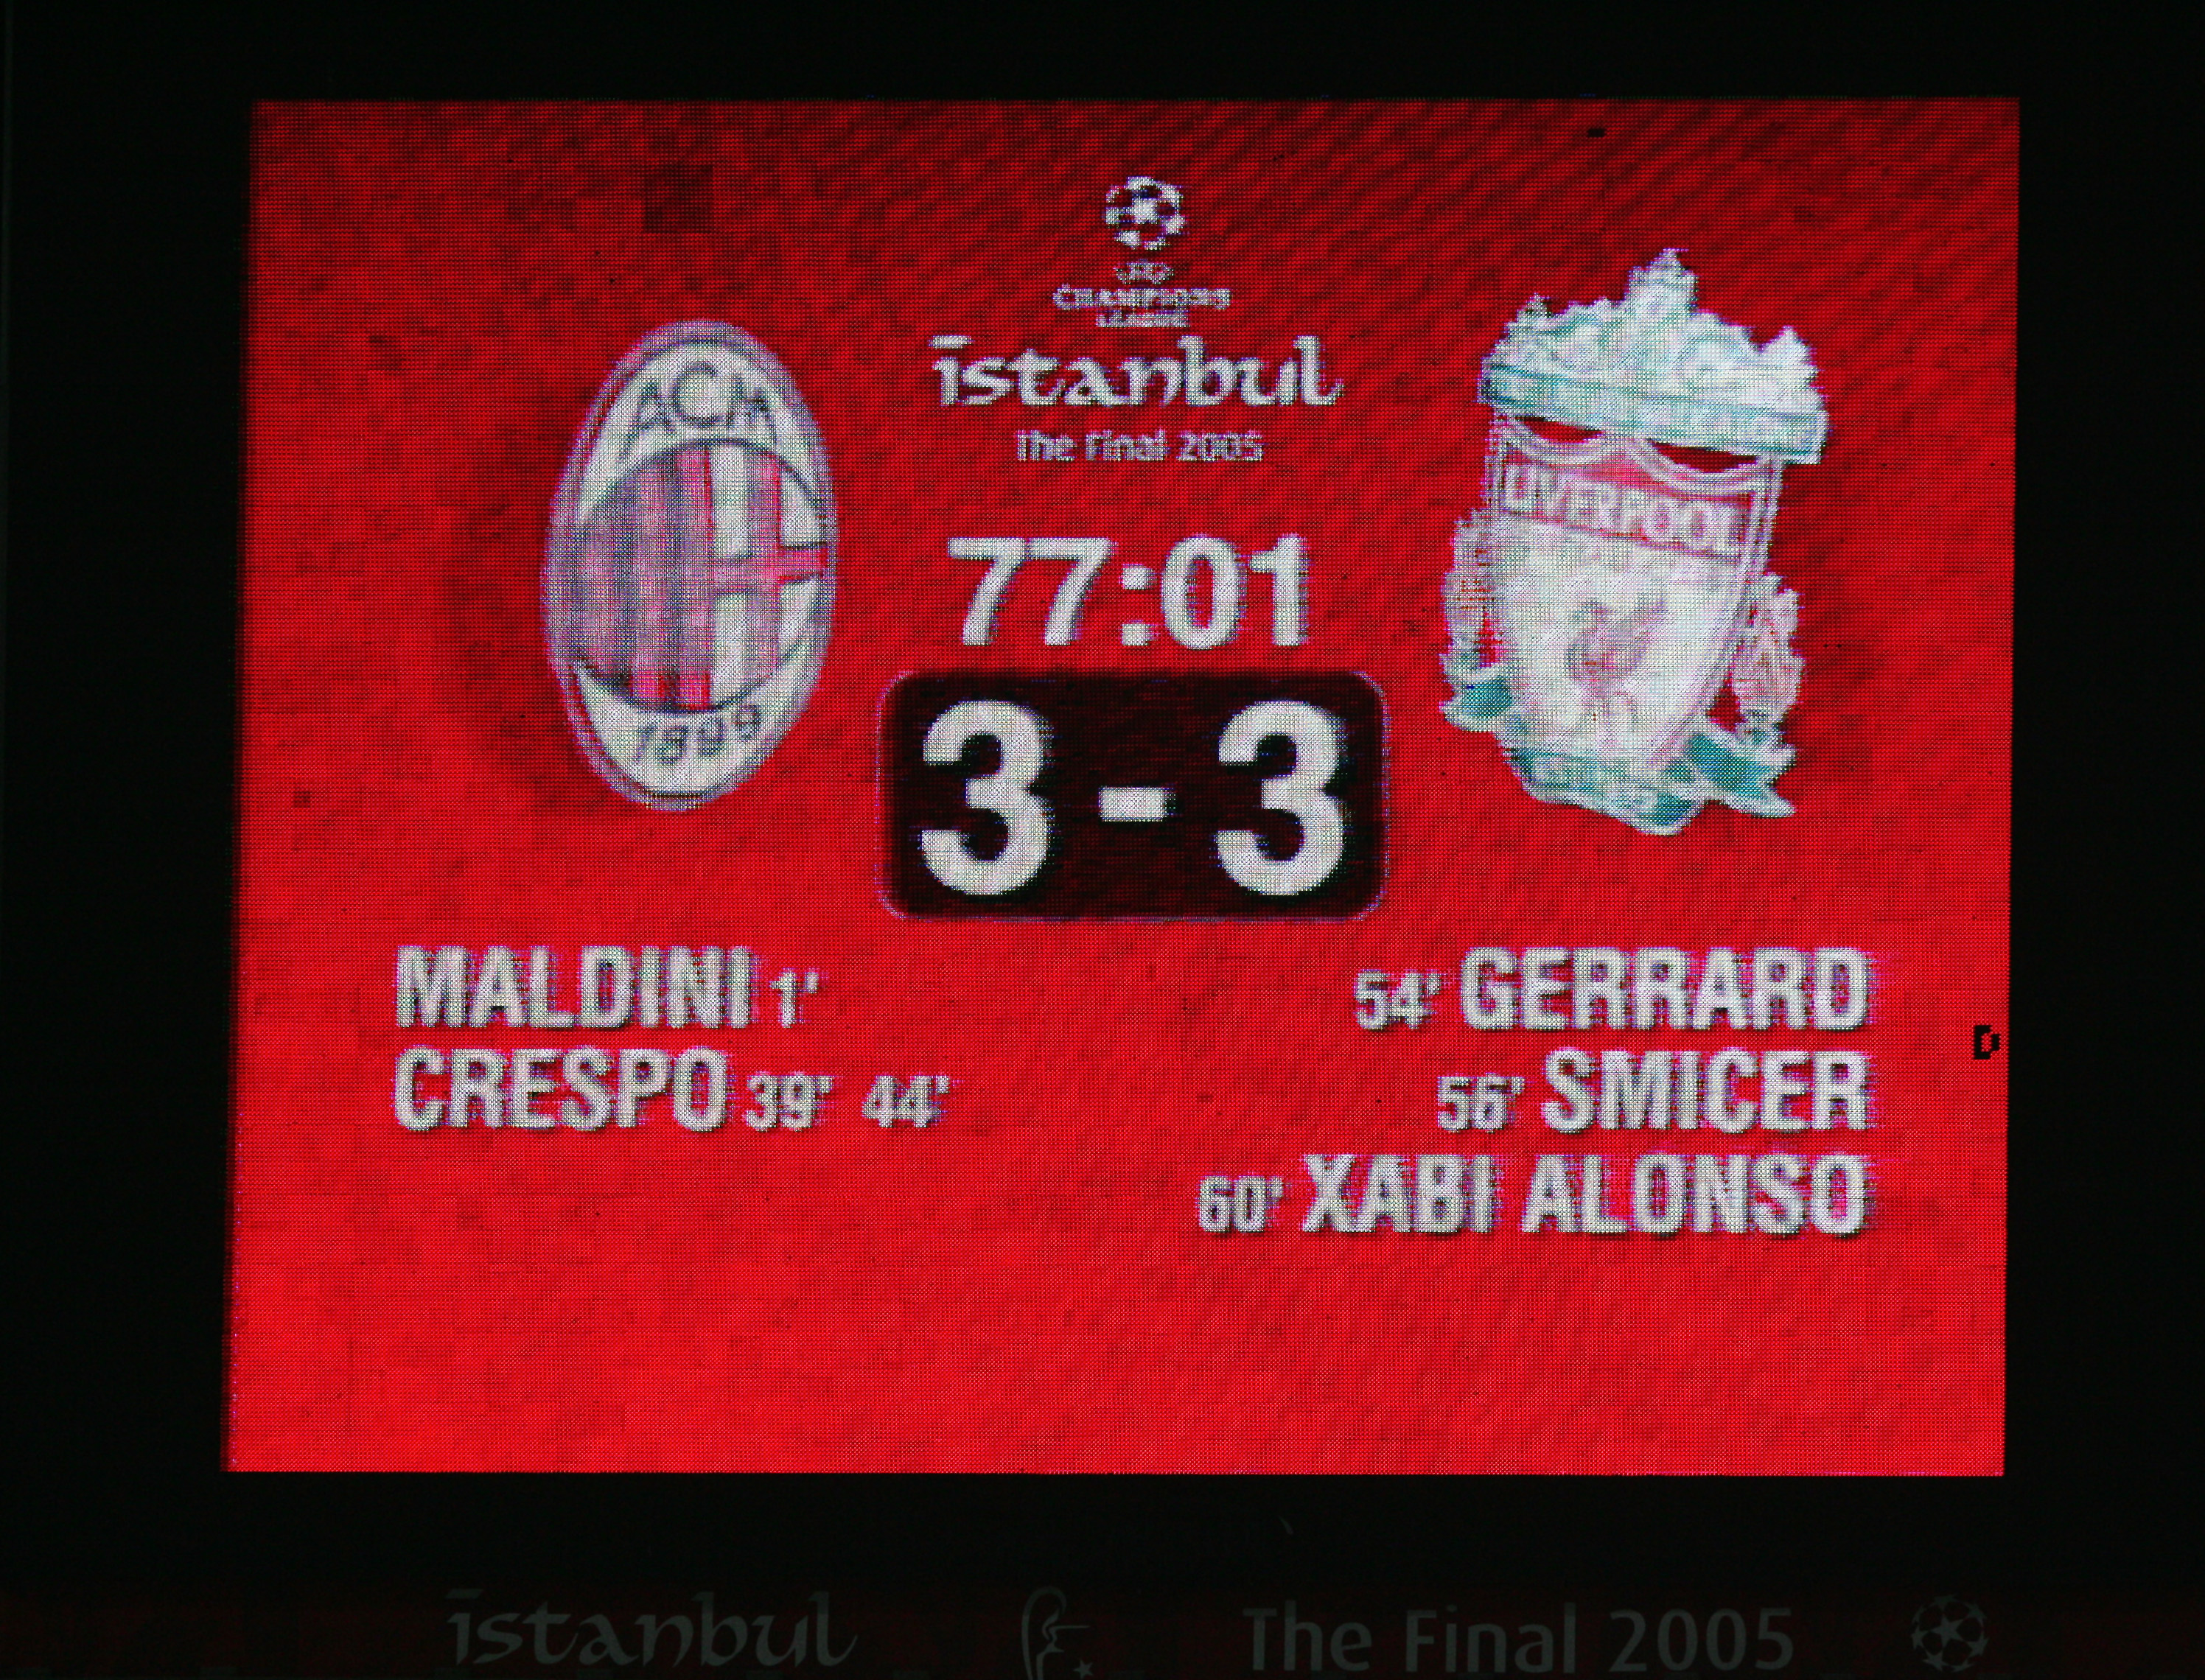 ISTANBUL, TURKEY - MAY 25:  The electronic scoreboard indicates Liverpool's amazing comeback during the European Champions League final between Liverpool and AC Milan on May 25, 2005 at the Ataturk Olympic Stadium in Istanbul, Turkey.   (Photo by Clive Br